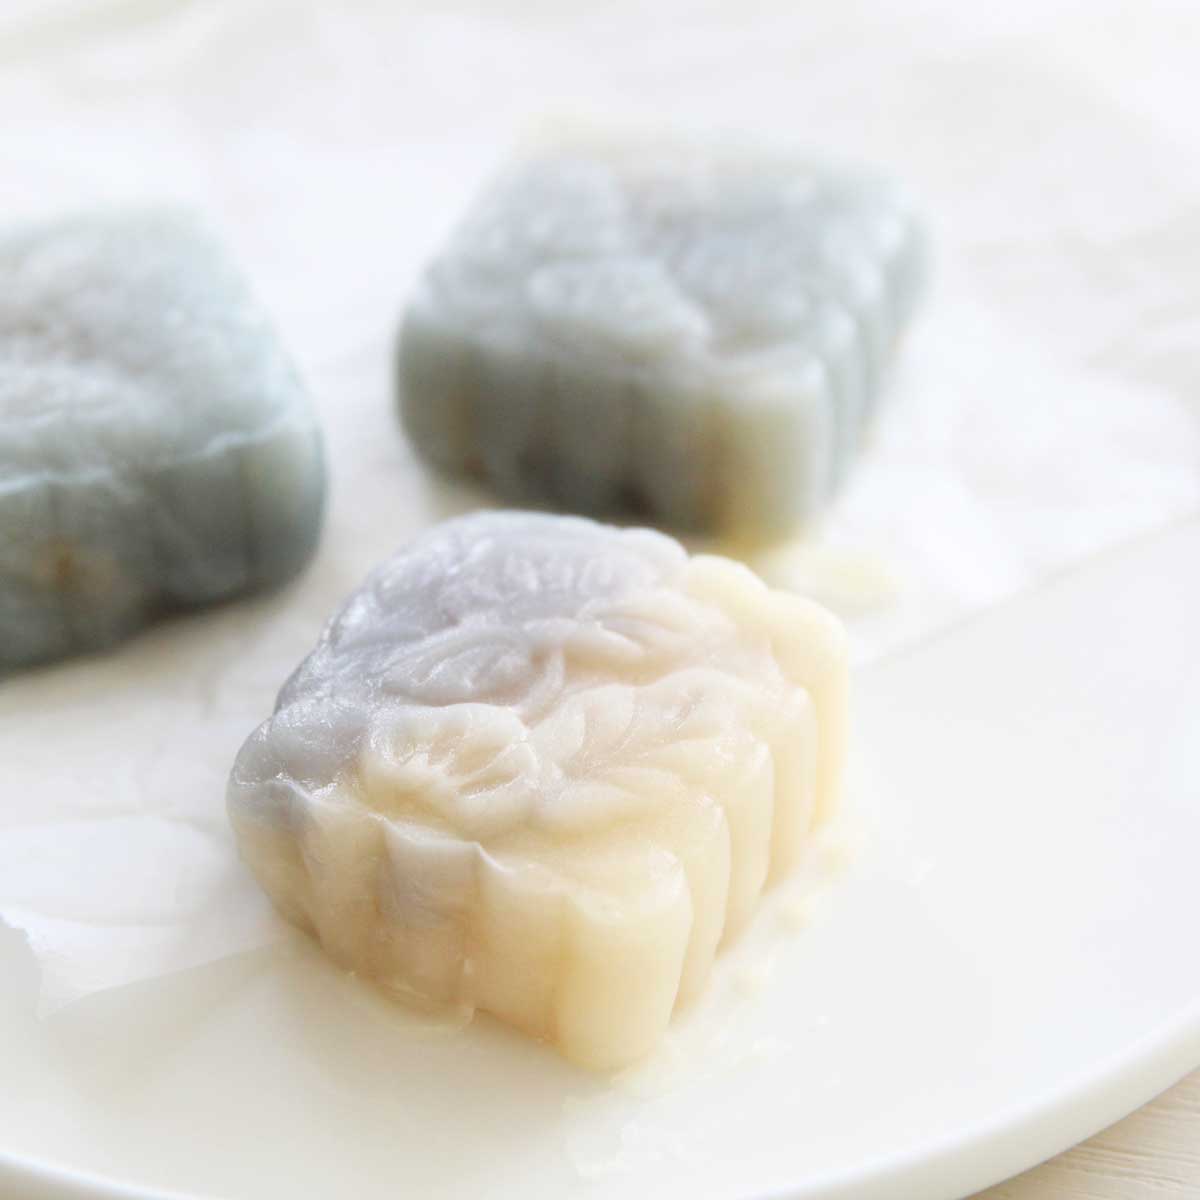 10 Minute Butterfly Pea Snowskin Mooncakes (No Steaming Required!) - Coconut Milk Snow Skin Mooncakes